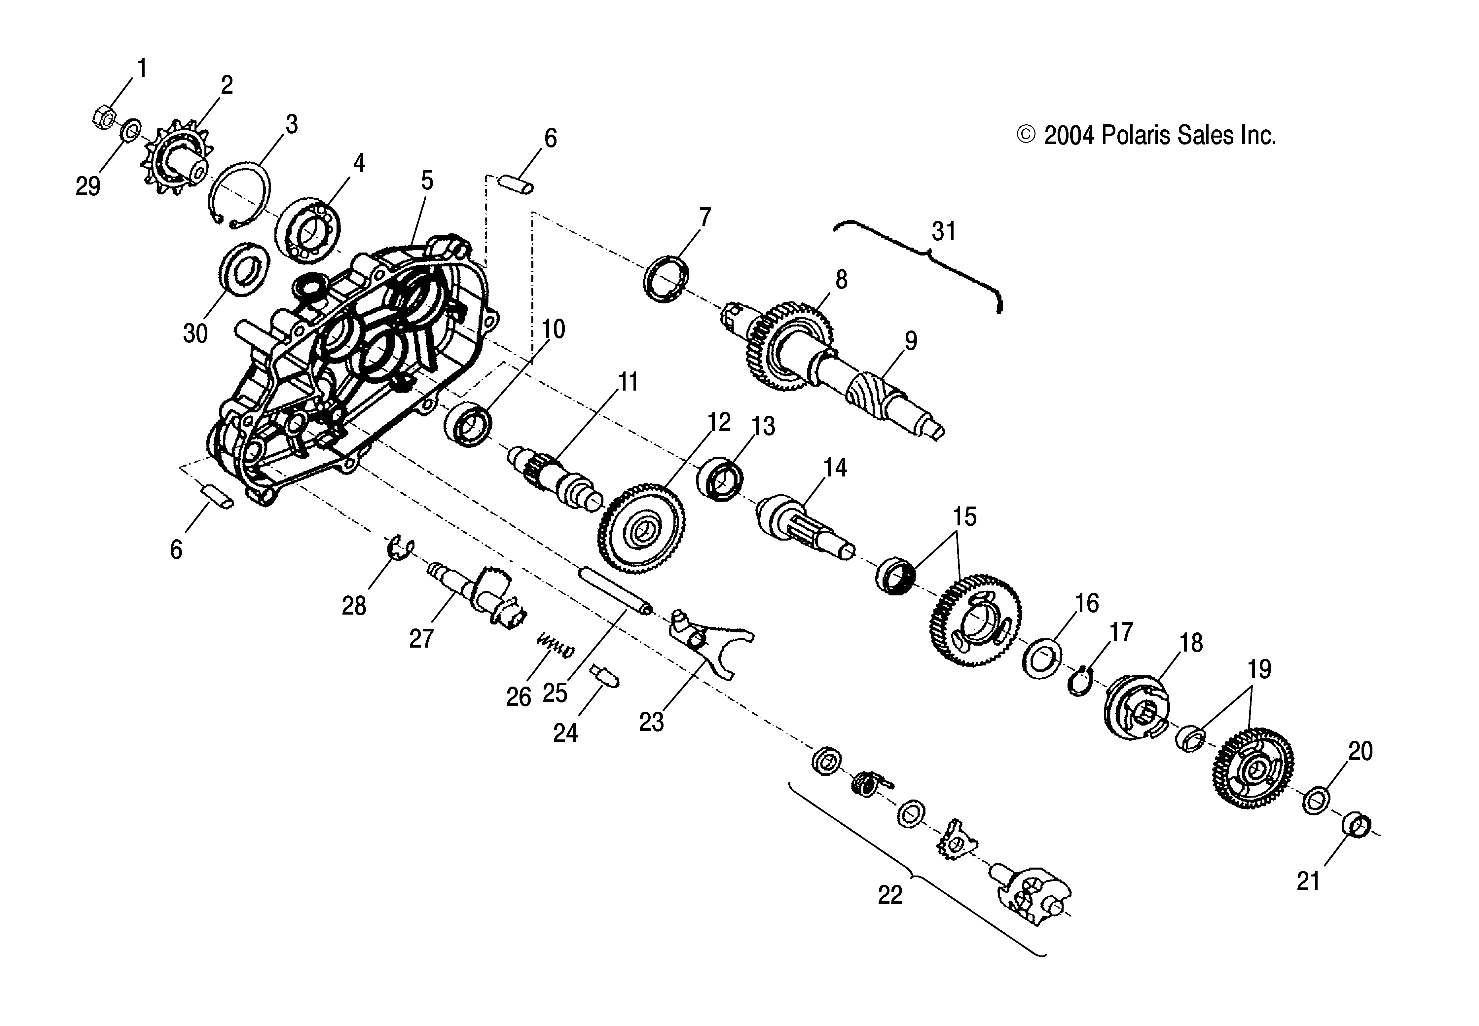 Part Number : 0452152 WASHER-FLAT